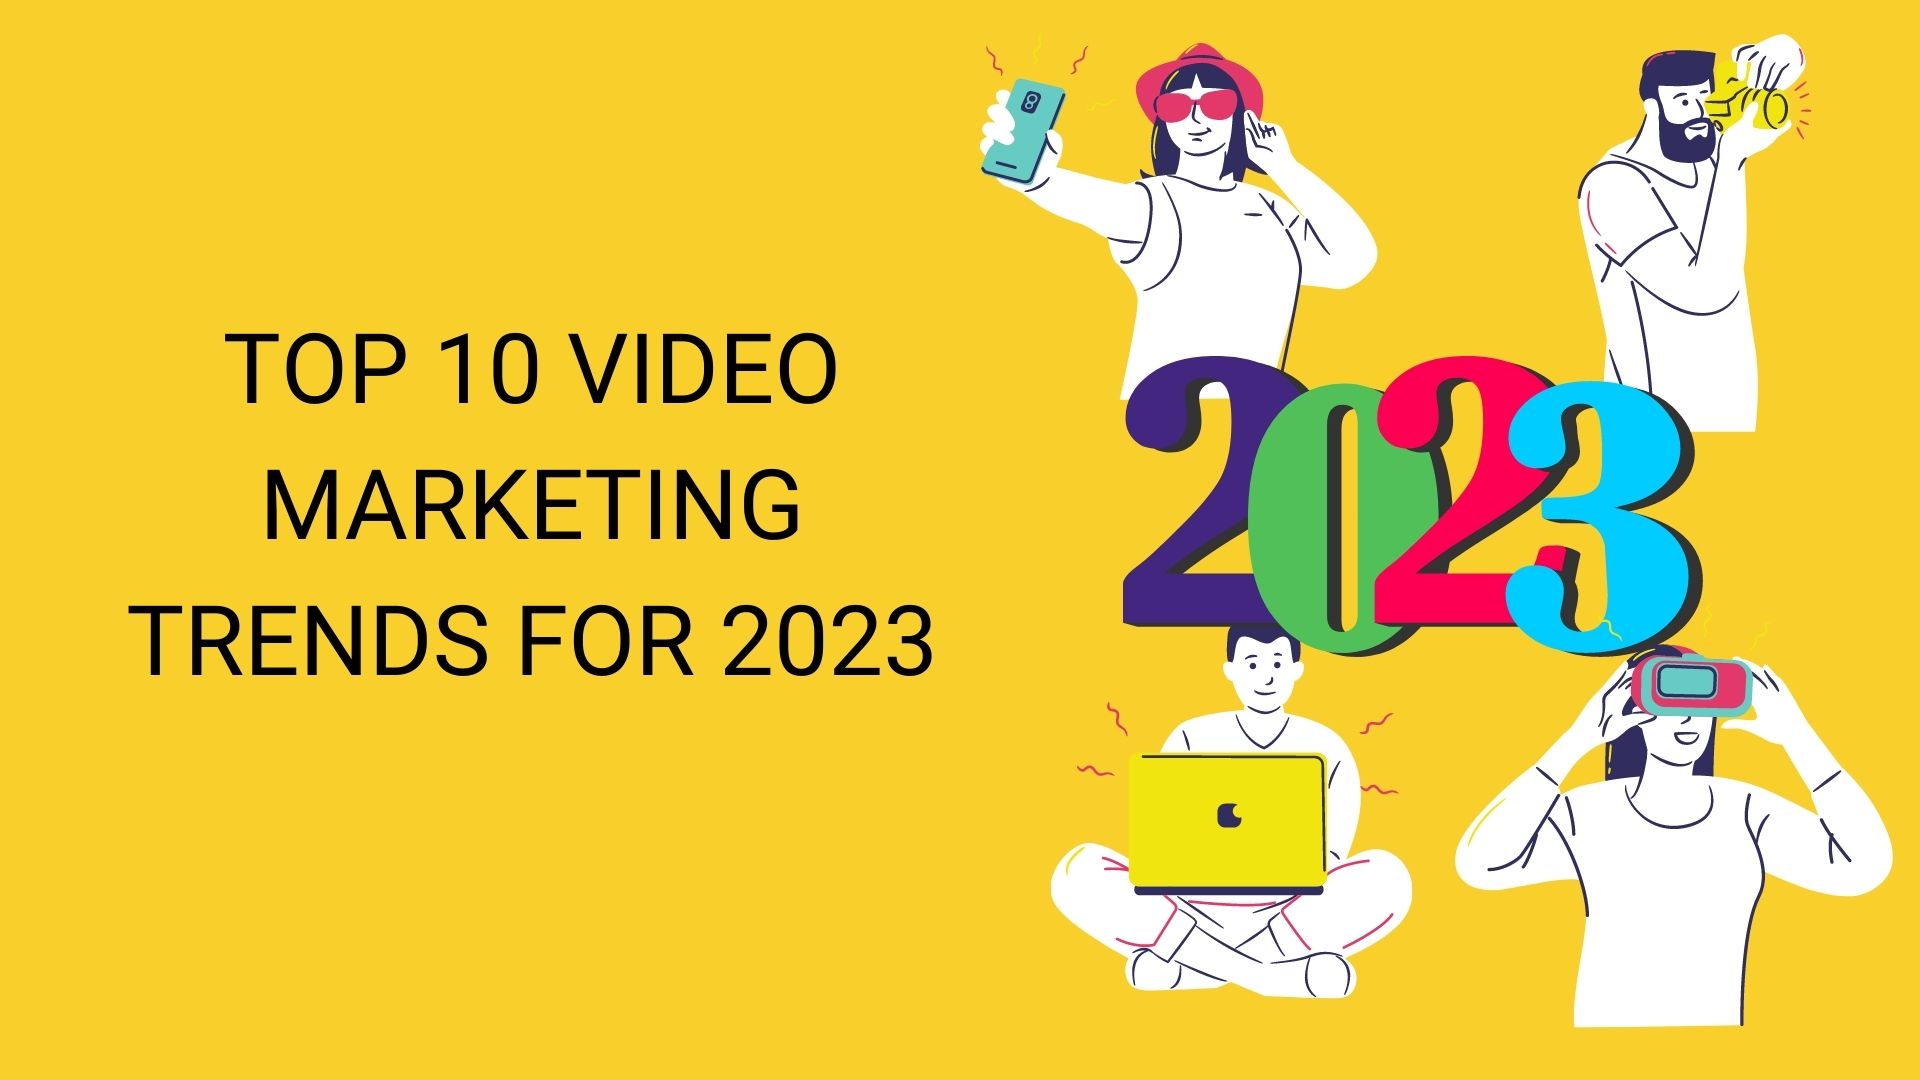 Video marketing trends for 2023